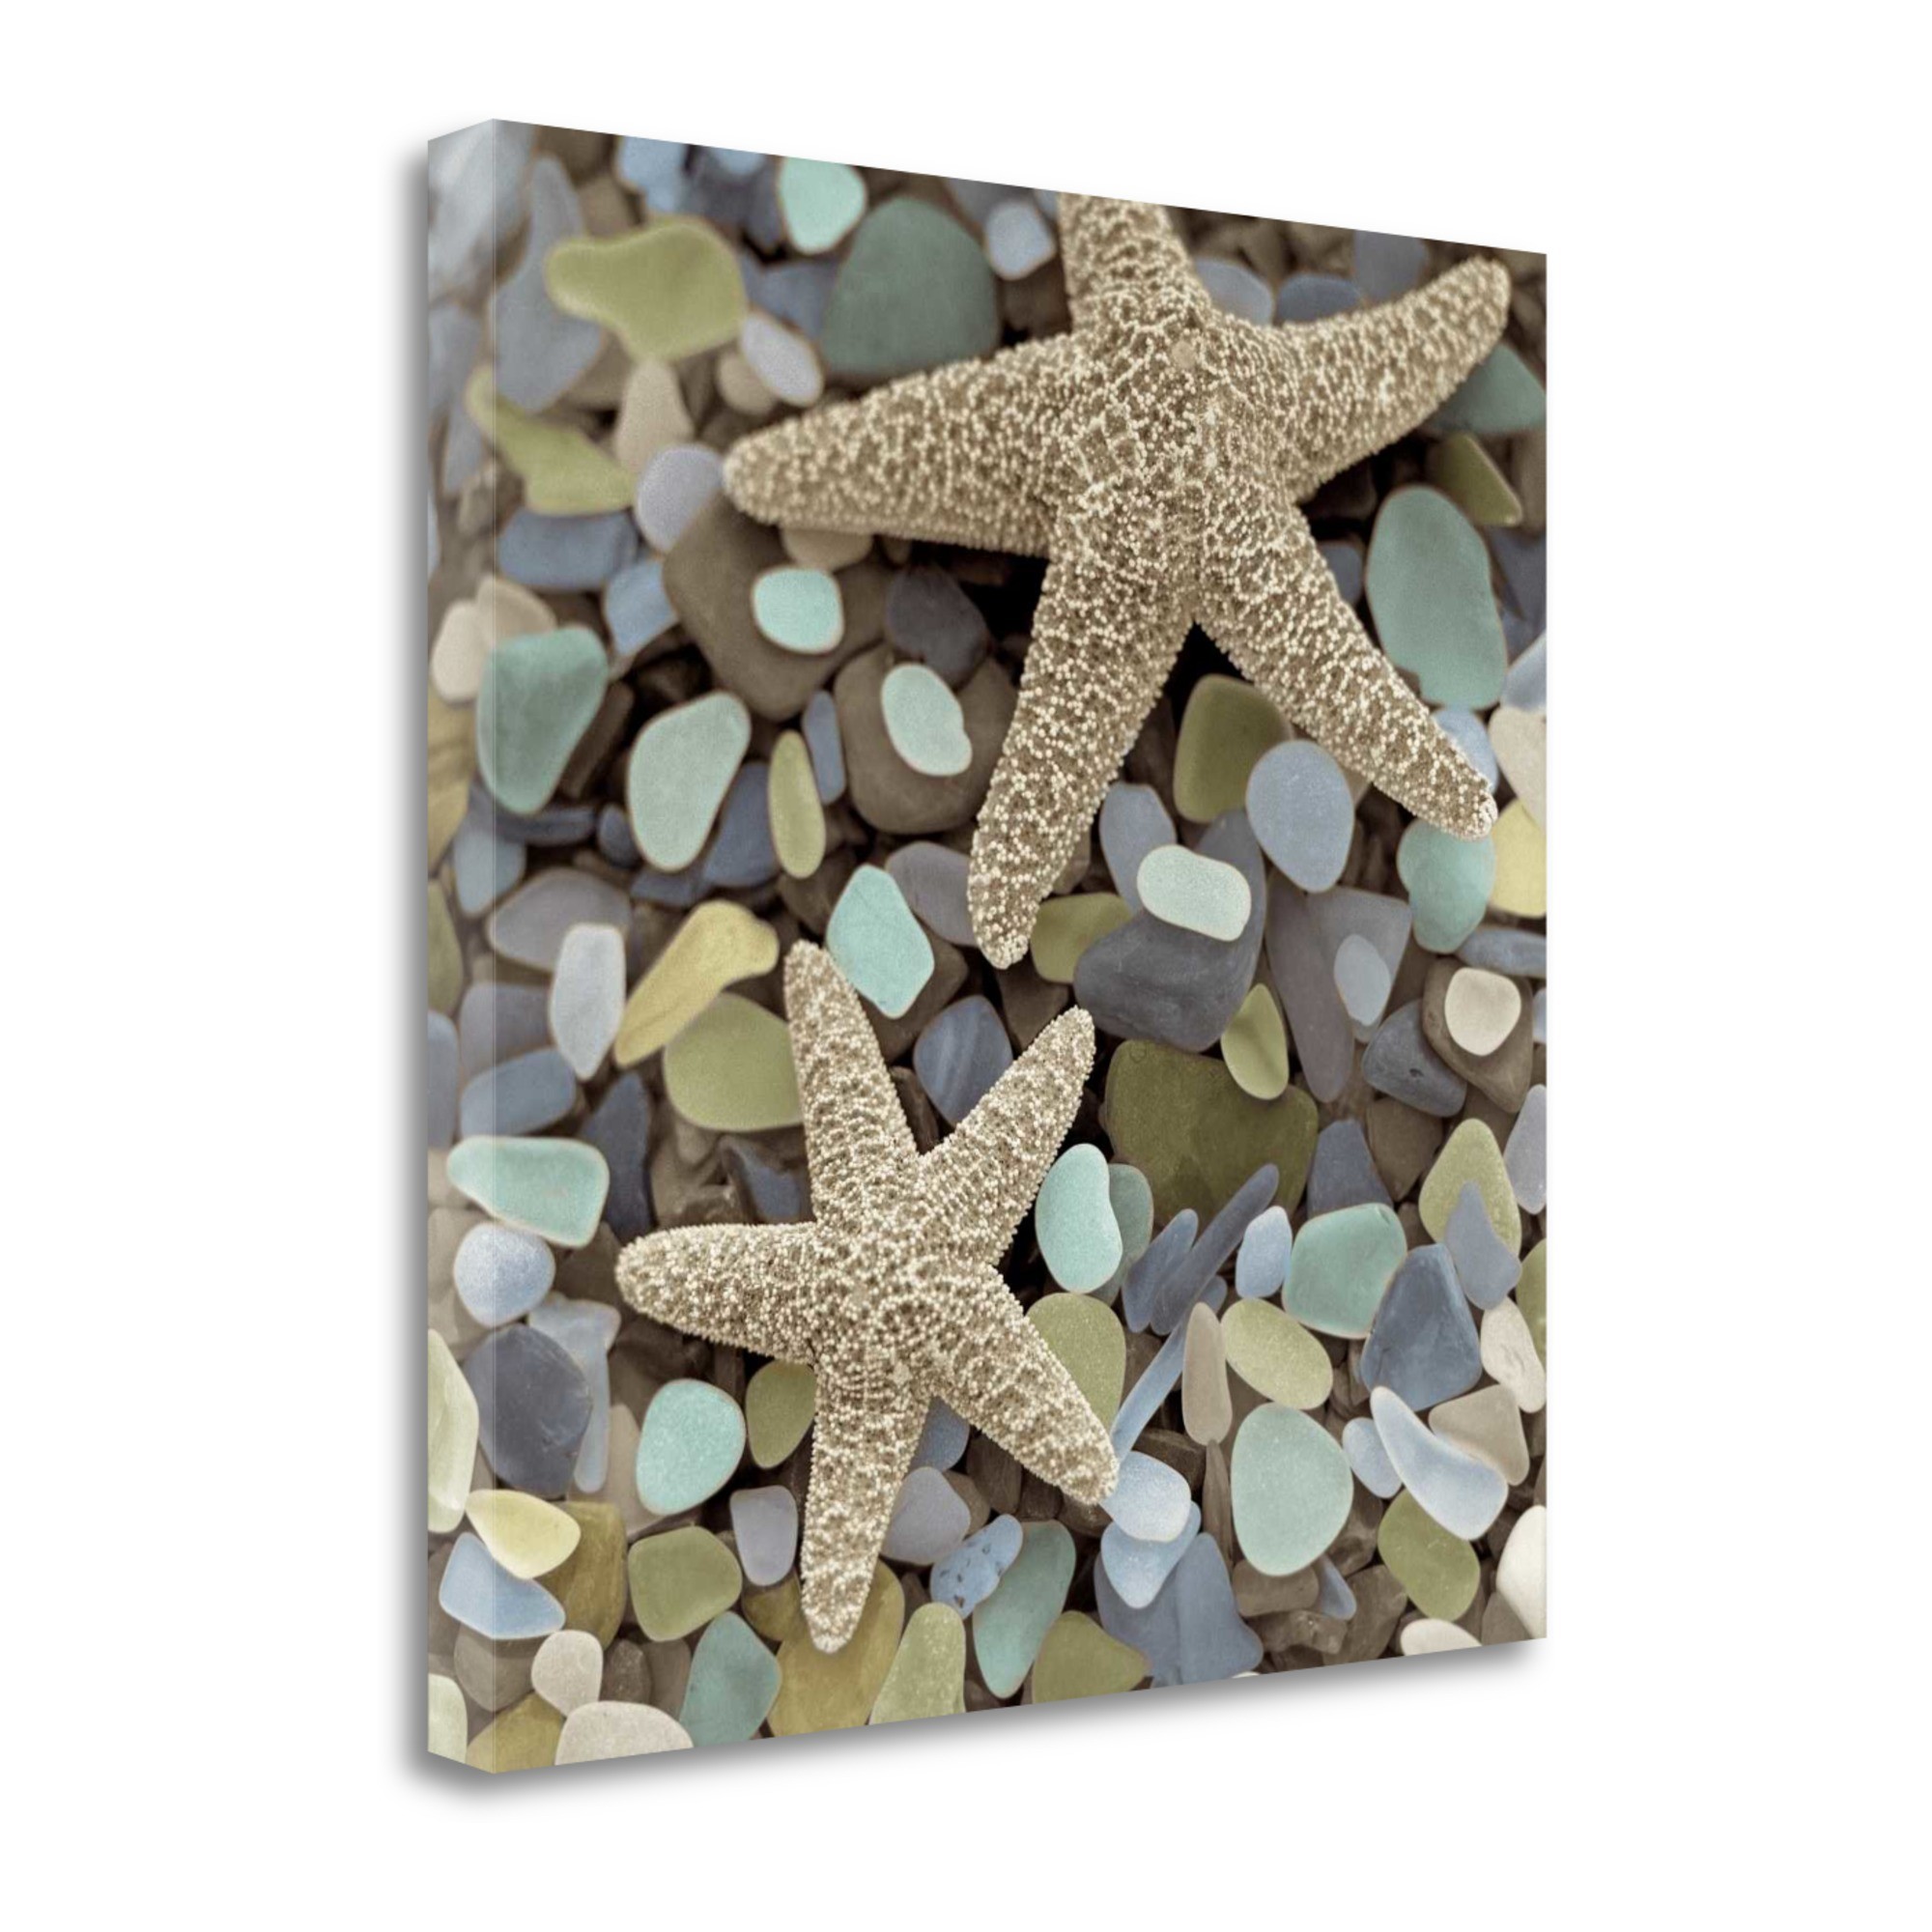 11" Two Starfish and Seaglass 4 Giclee Wrap Canvas Wall Art